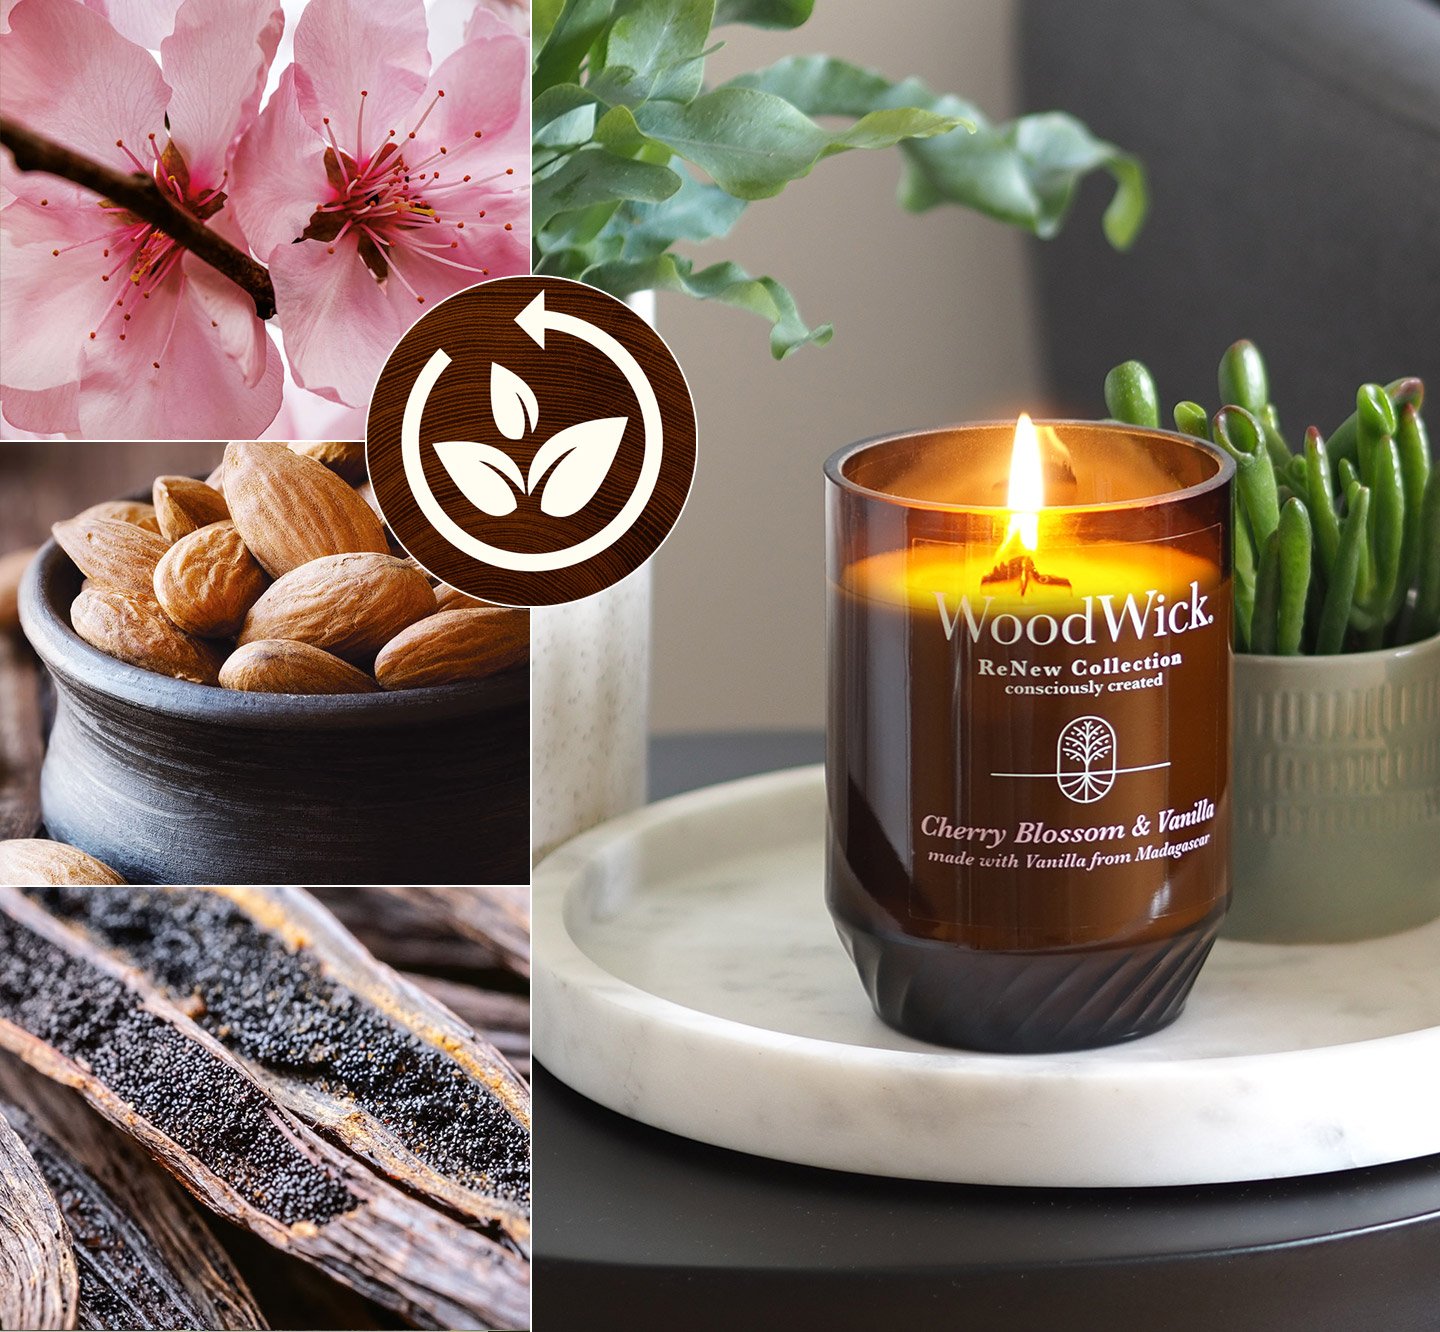 How to Make Woodwick Candles: A Simple Tutorial for Natural Candles